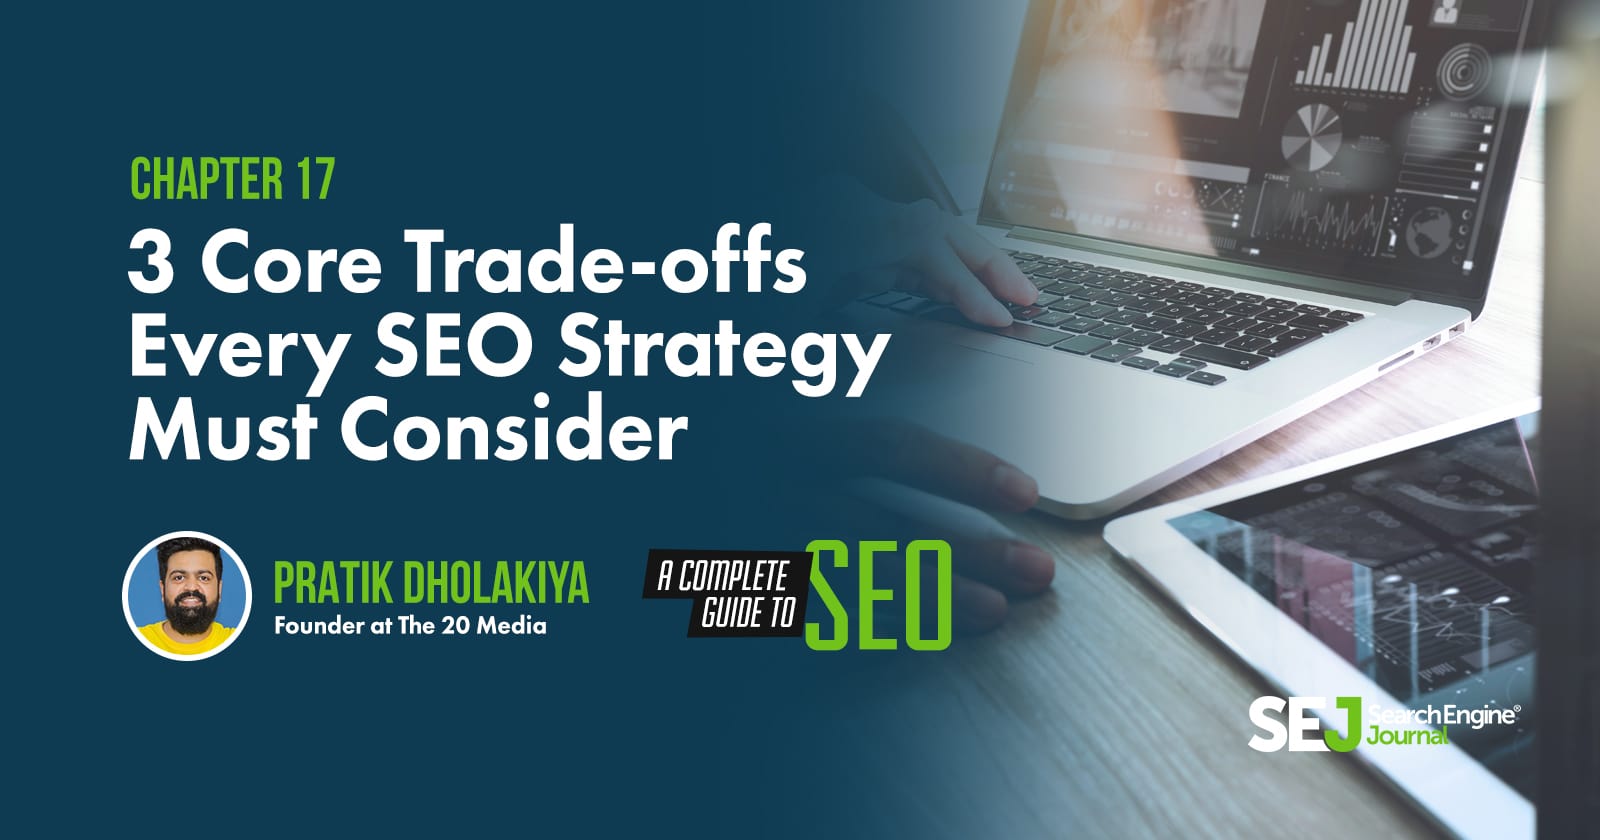 3 Core Trade-offs Every SEO Strategy Must Consider